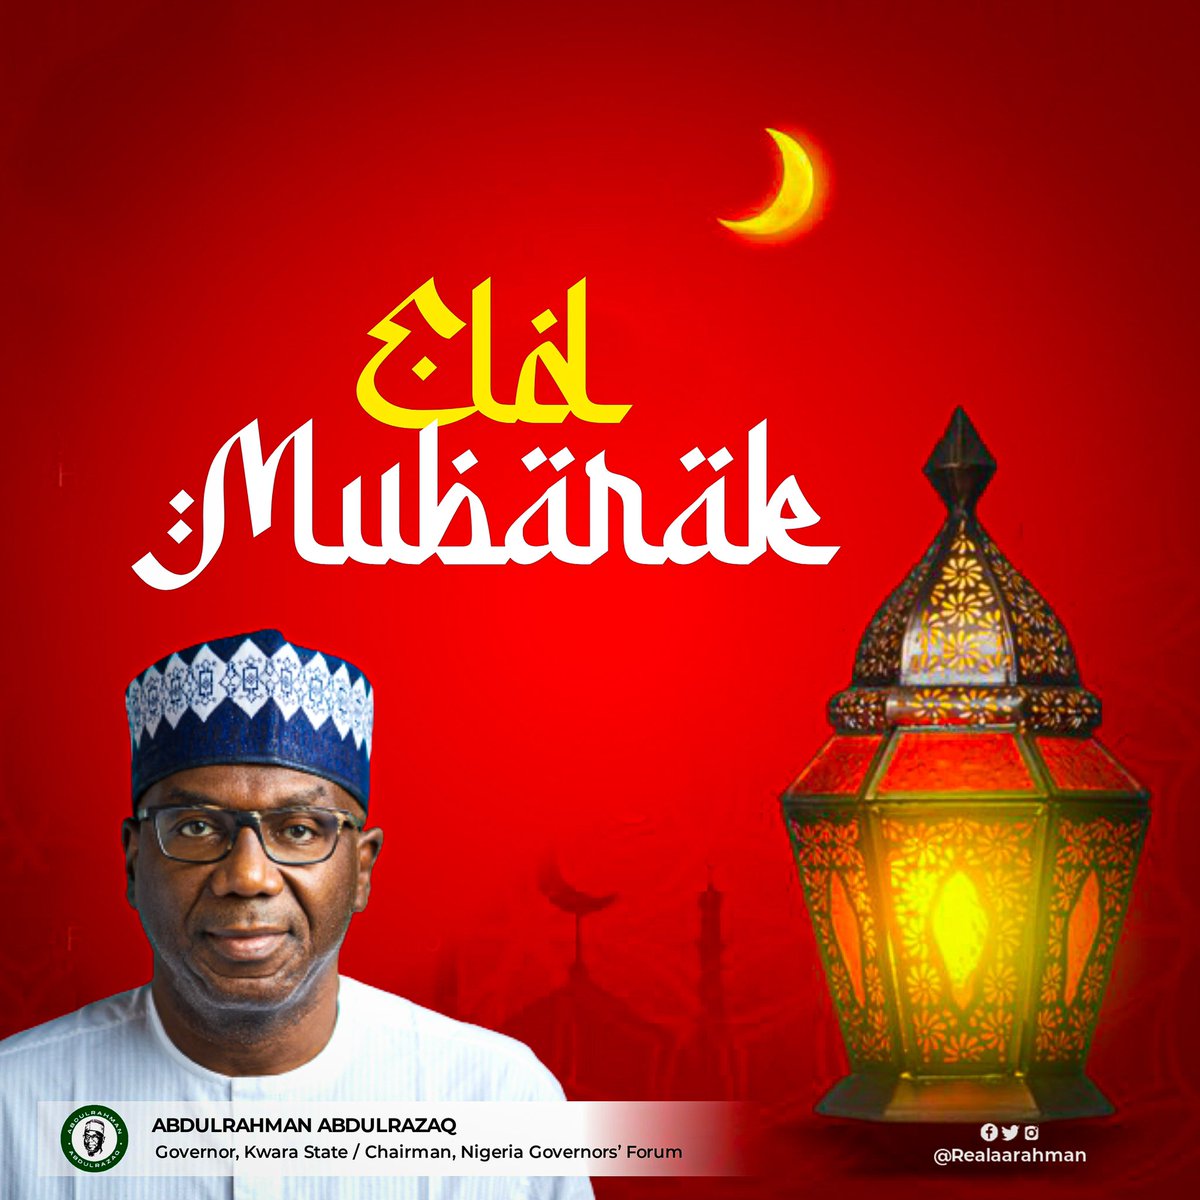 I join the rest of the world to heartily rejoice with the Muslim community on the occasion of the Eid-ul-Fitri, which marks the end of the Ramadan fast. I especially congratulate the leader of the faithful in Kwara Emir of Ilorin Dr Ibrahim Sulu-Gambari on the successful